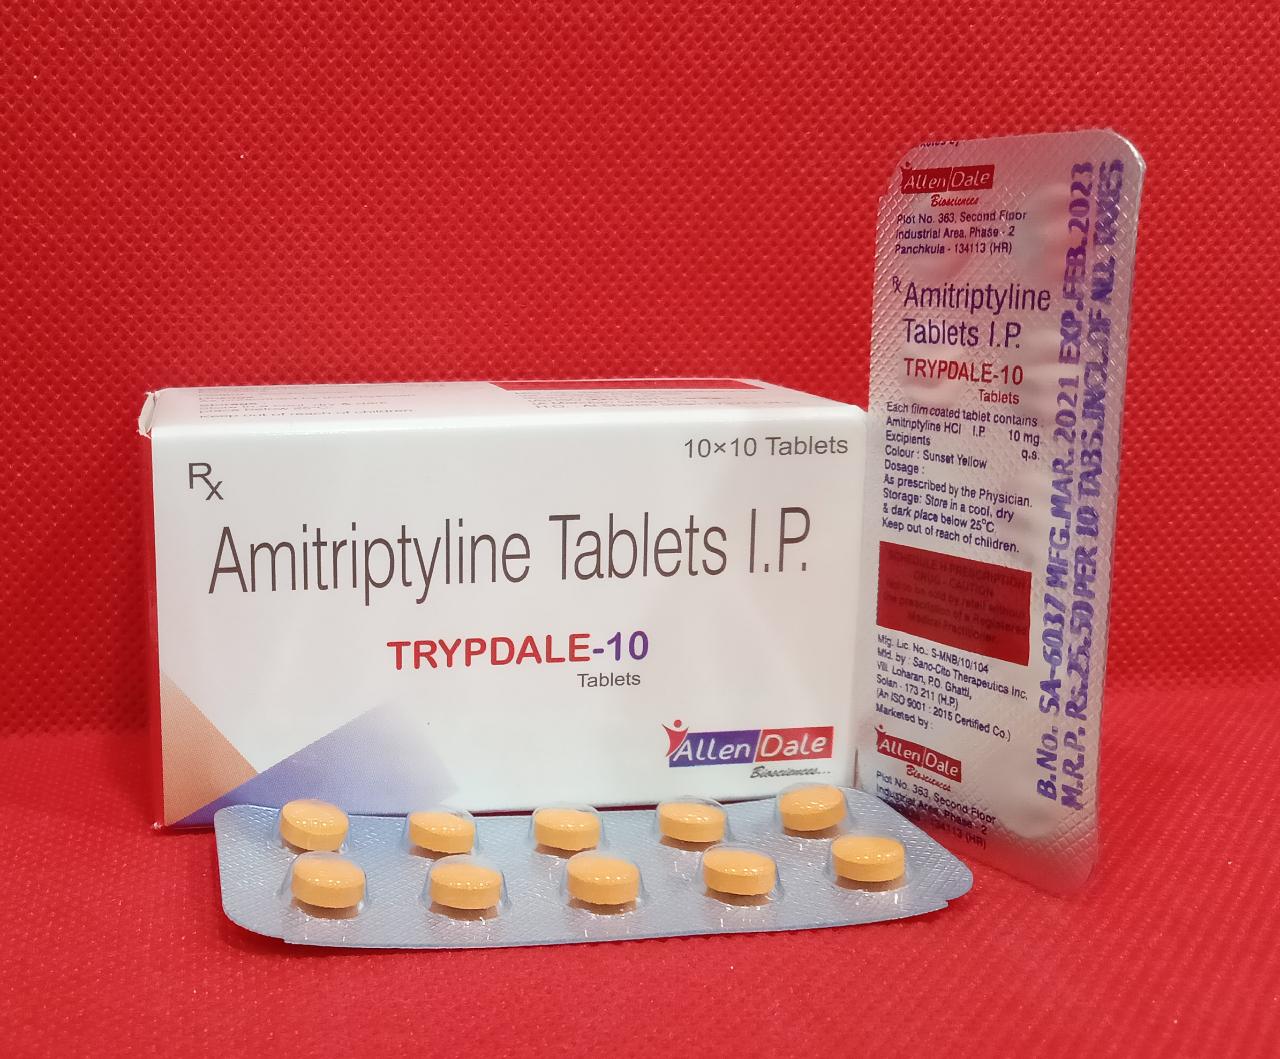 TRYPDALE-10 Tablets